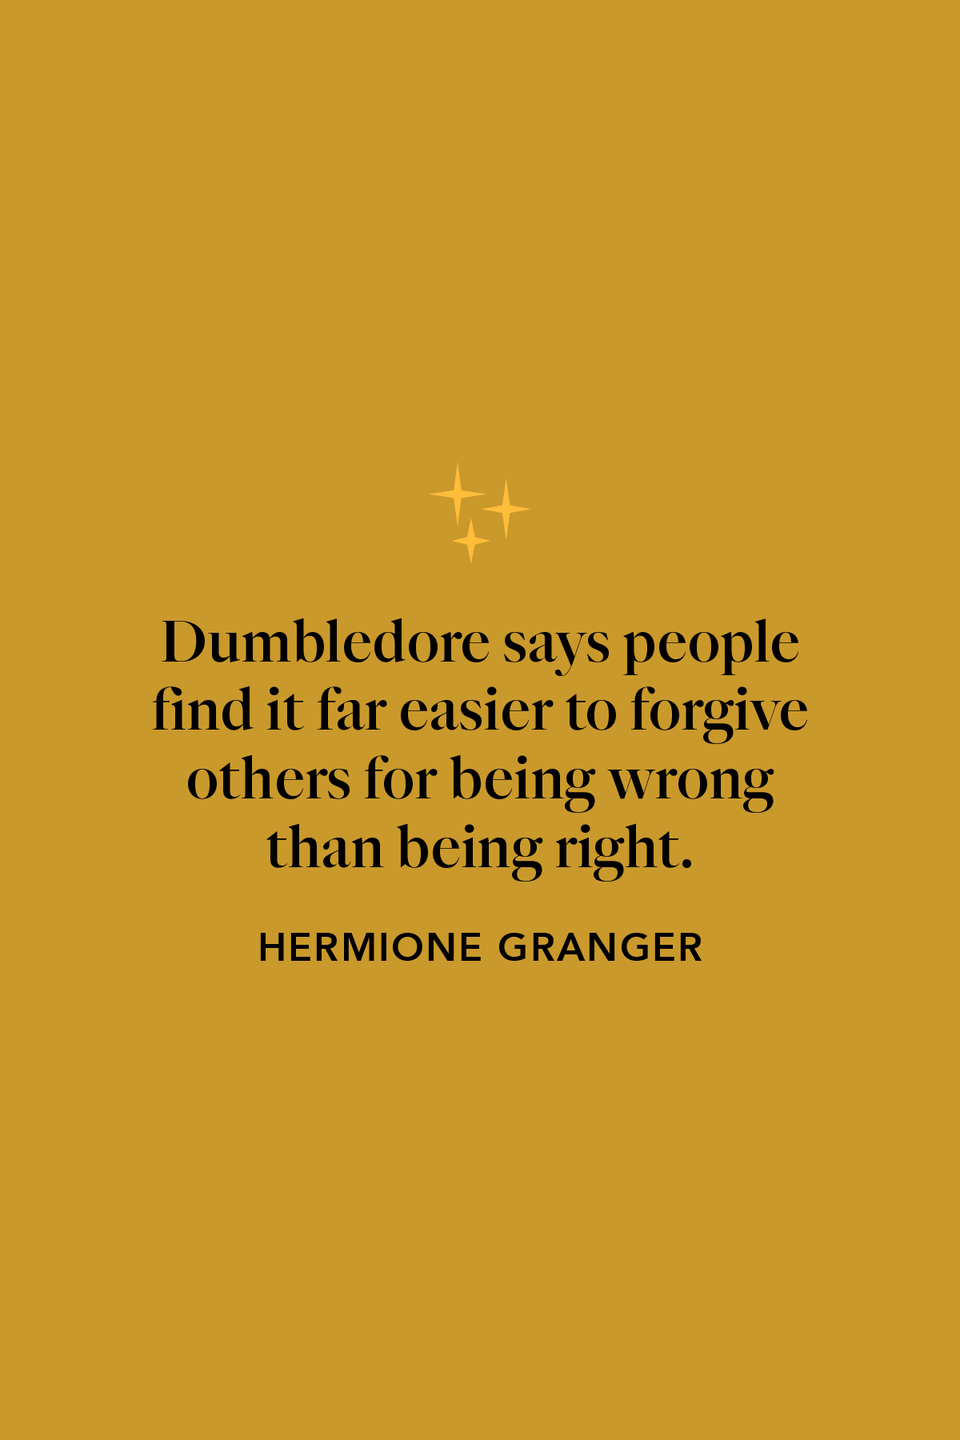 Hermione quoting Dumbledore on forgiveness